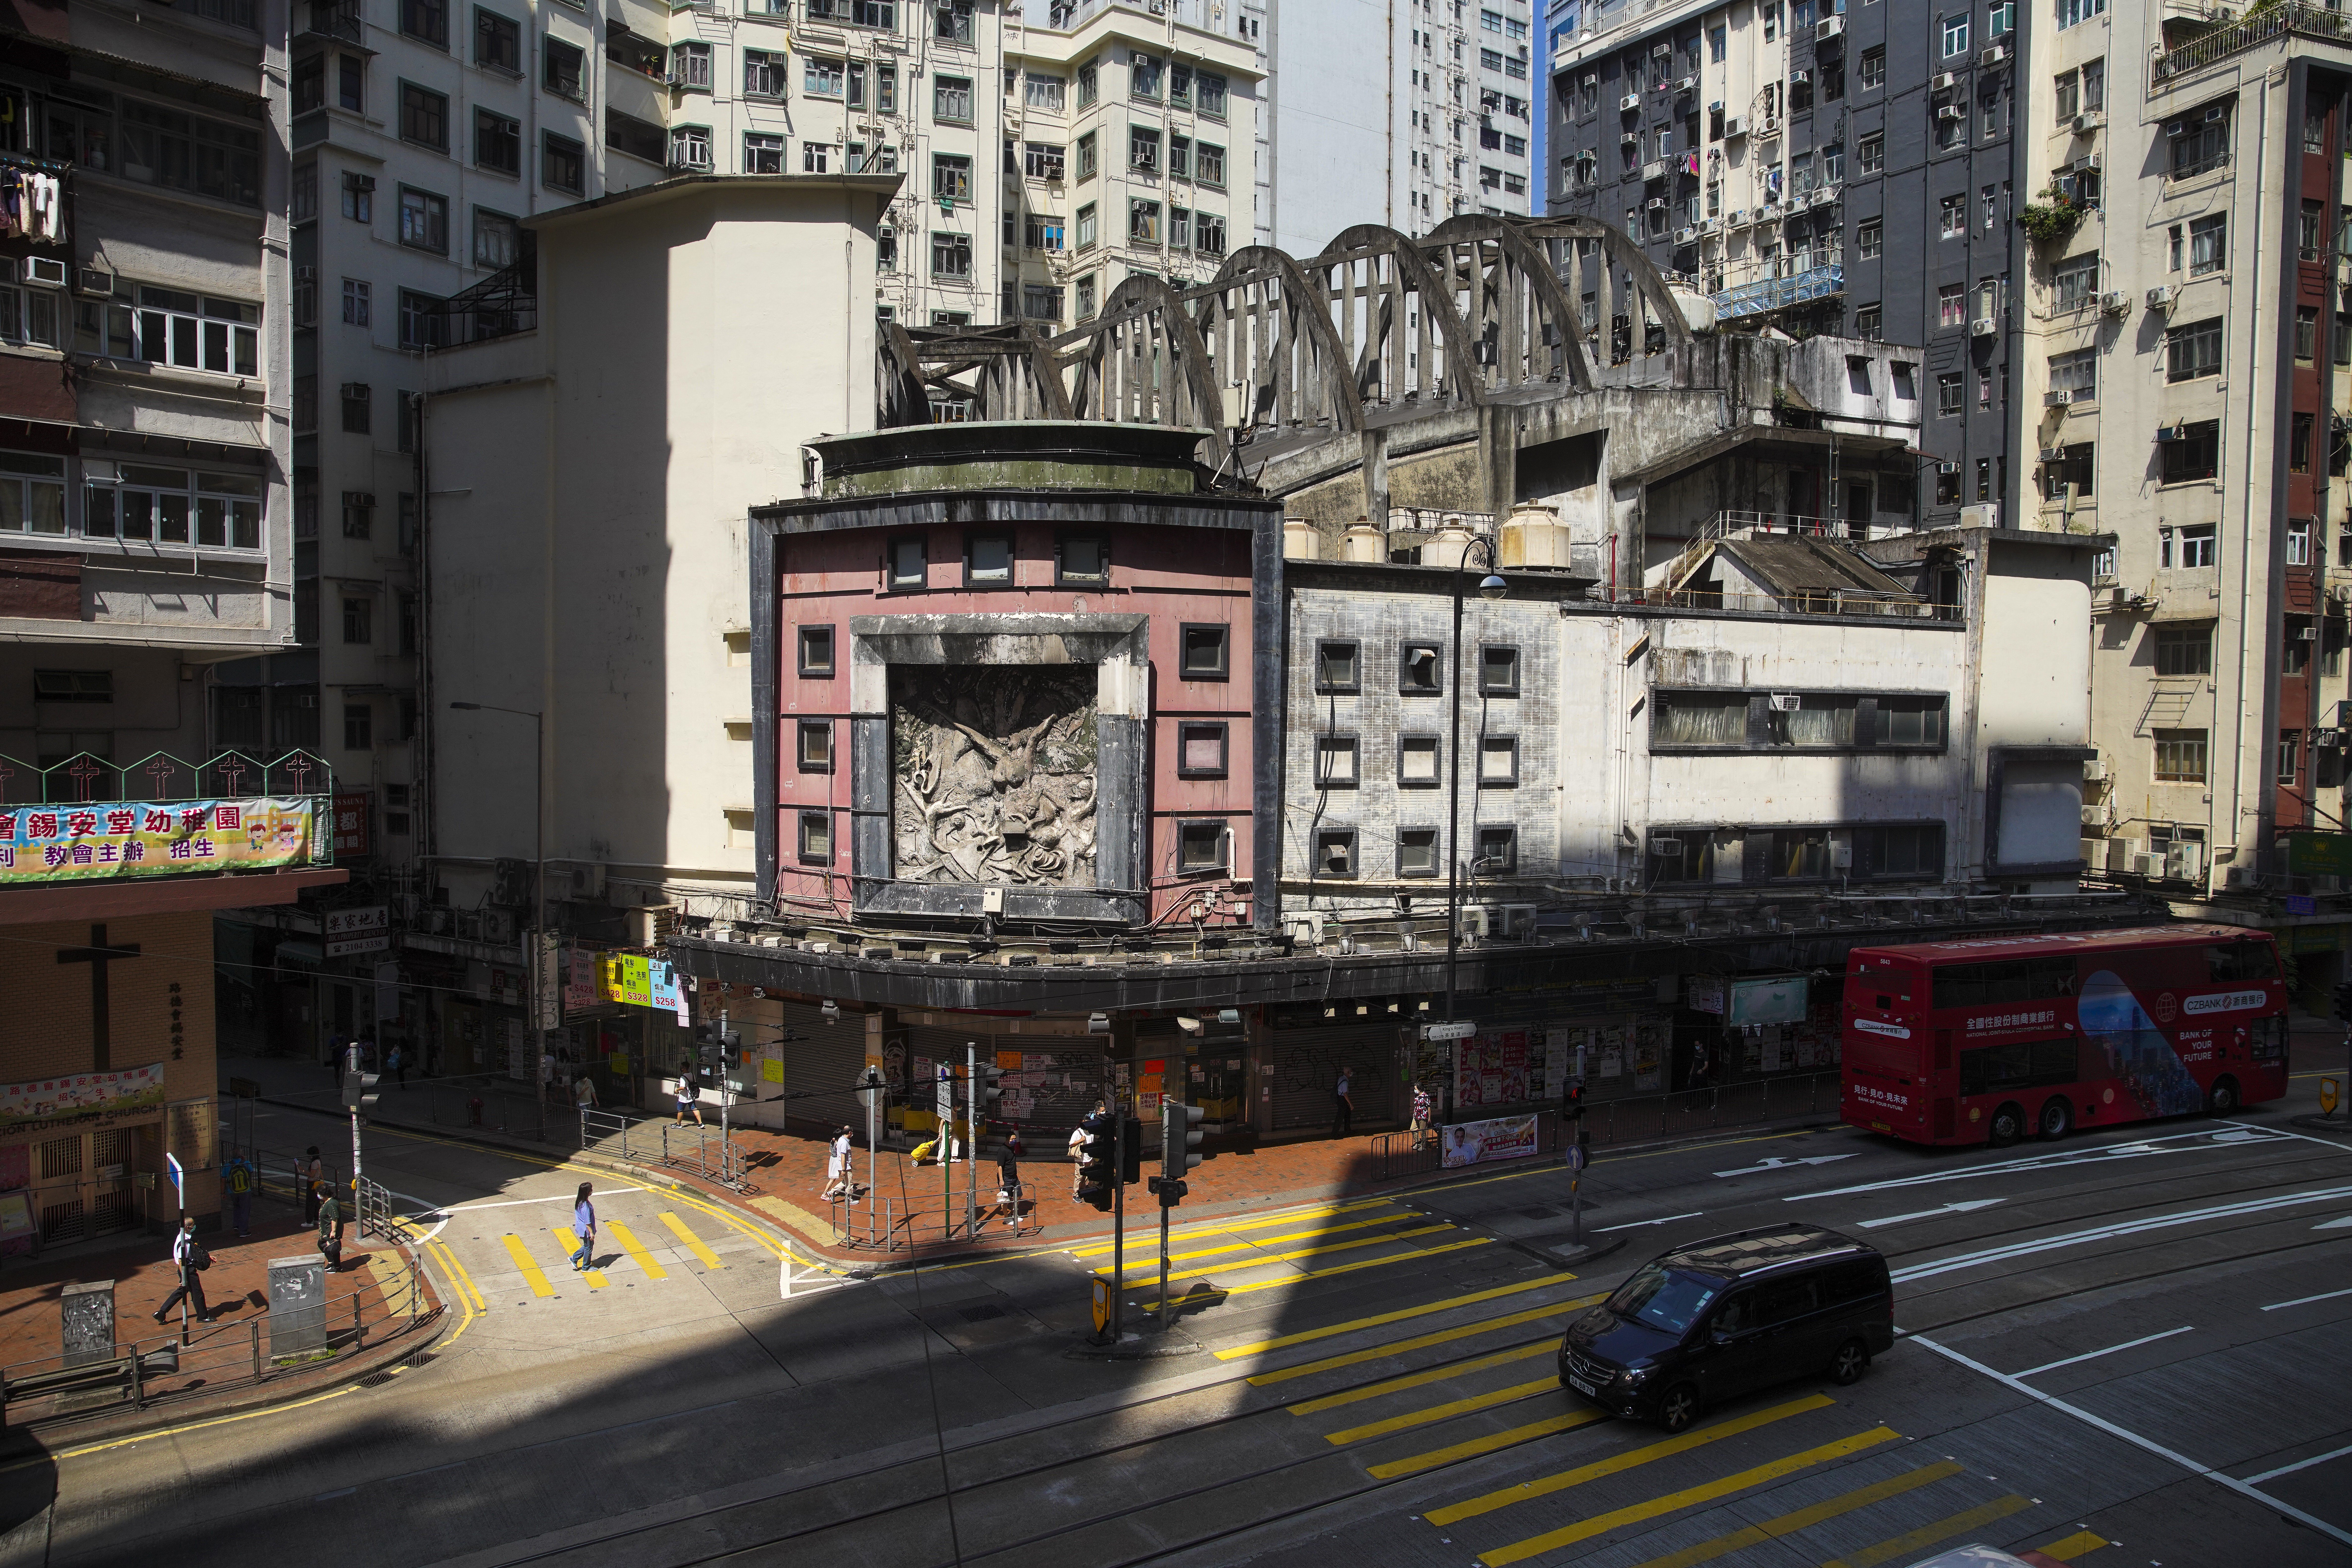 State Theatre, a Grade 1 historic building with a distinctive parabolic roof truss, is to be restored. Photo: Winson Wong